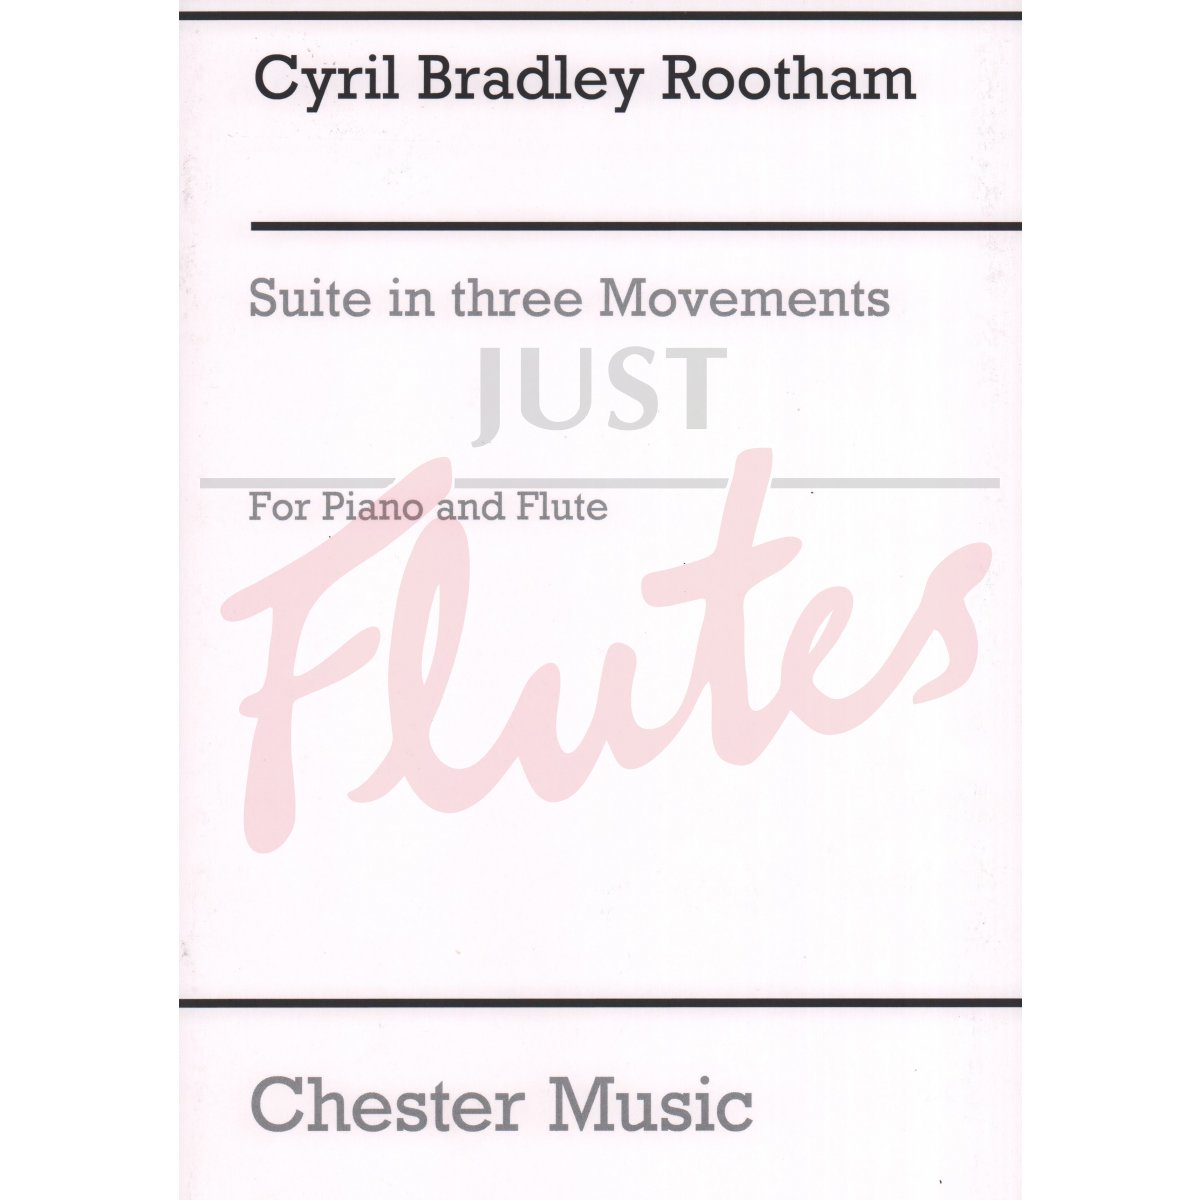 Suite in Three Movements for Flute and Piano